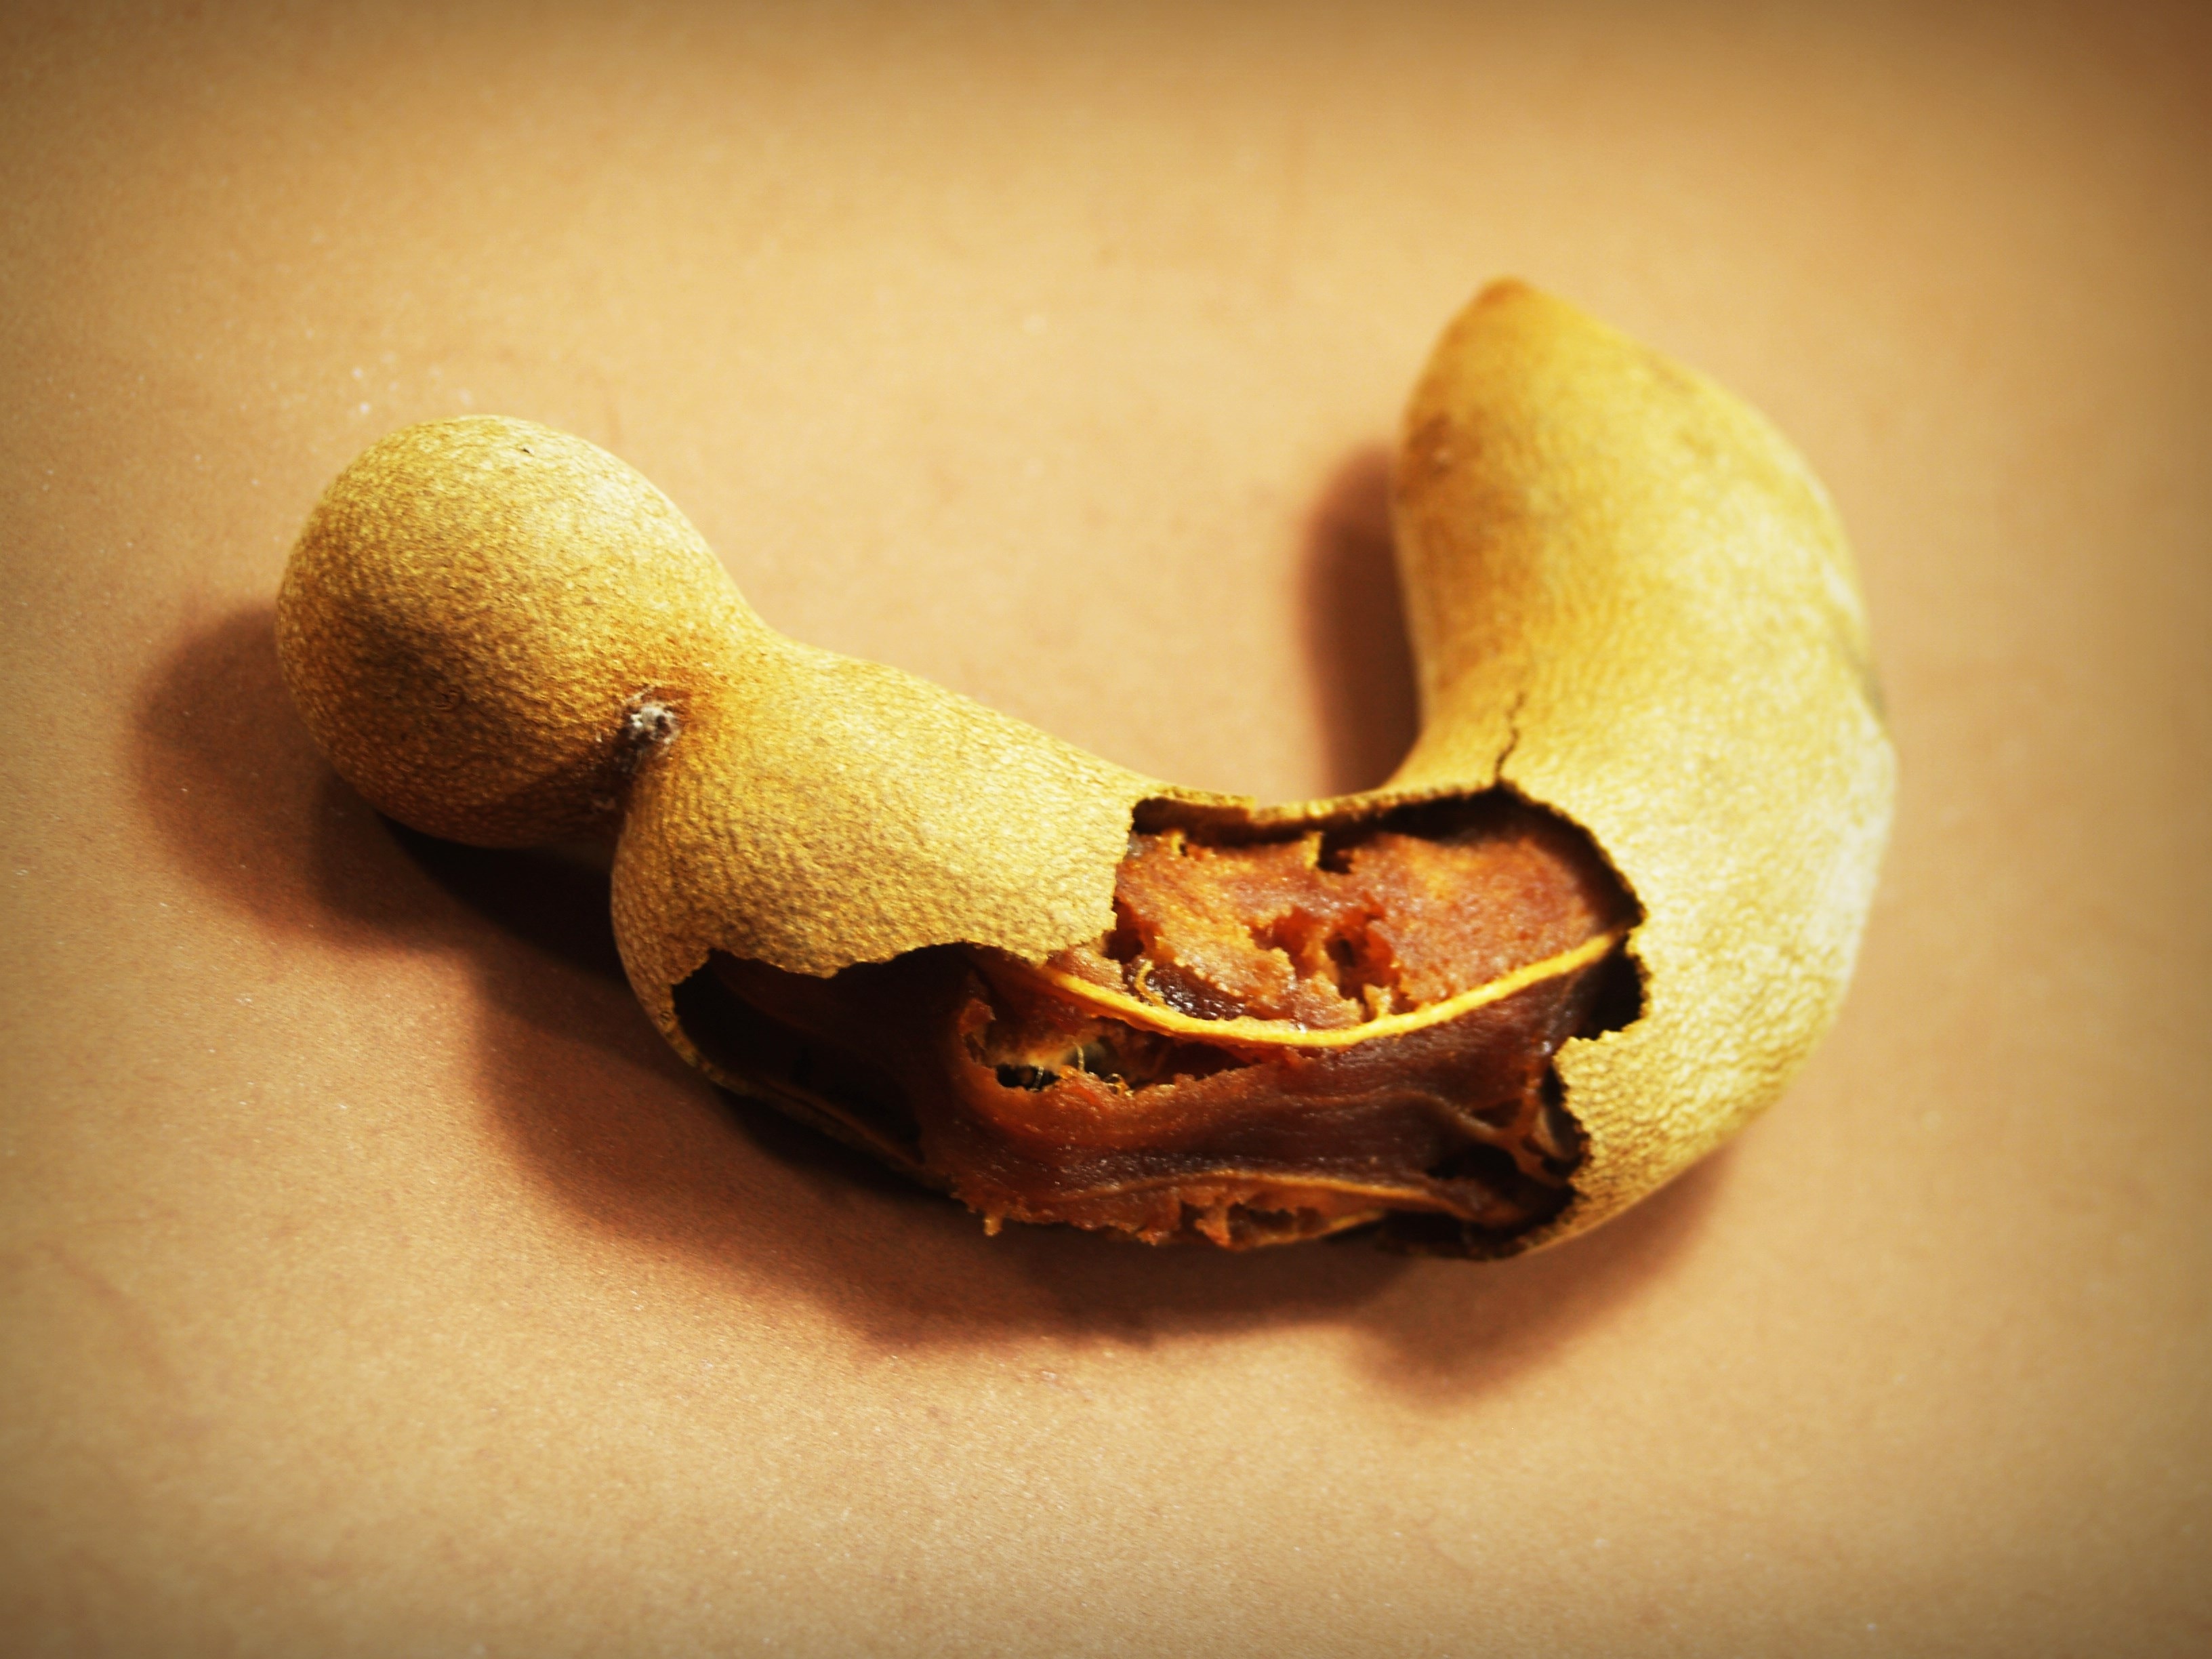 Tamarind, Ripe, Spice, Isolated, no people, single object